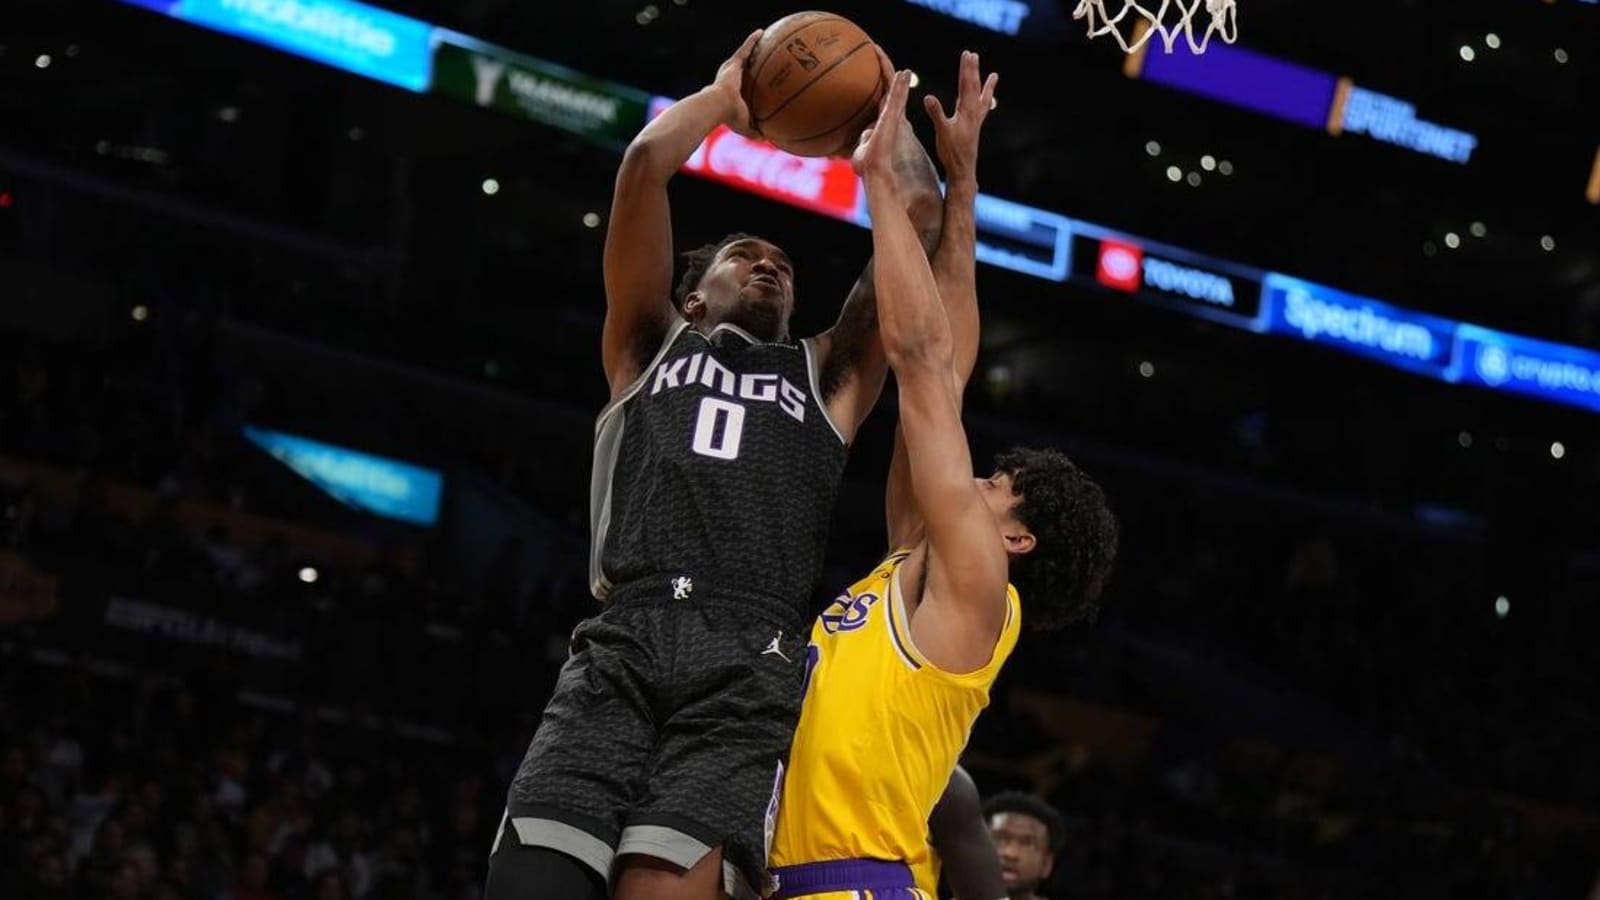 Kings rally past Lakers to extend win streak